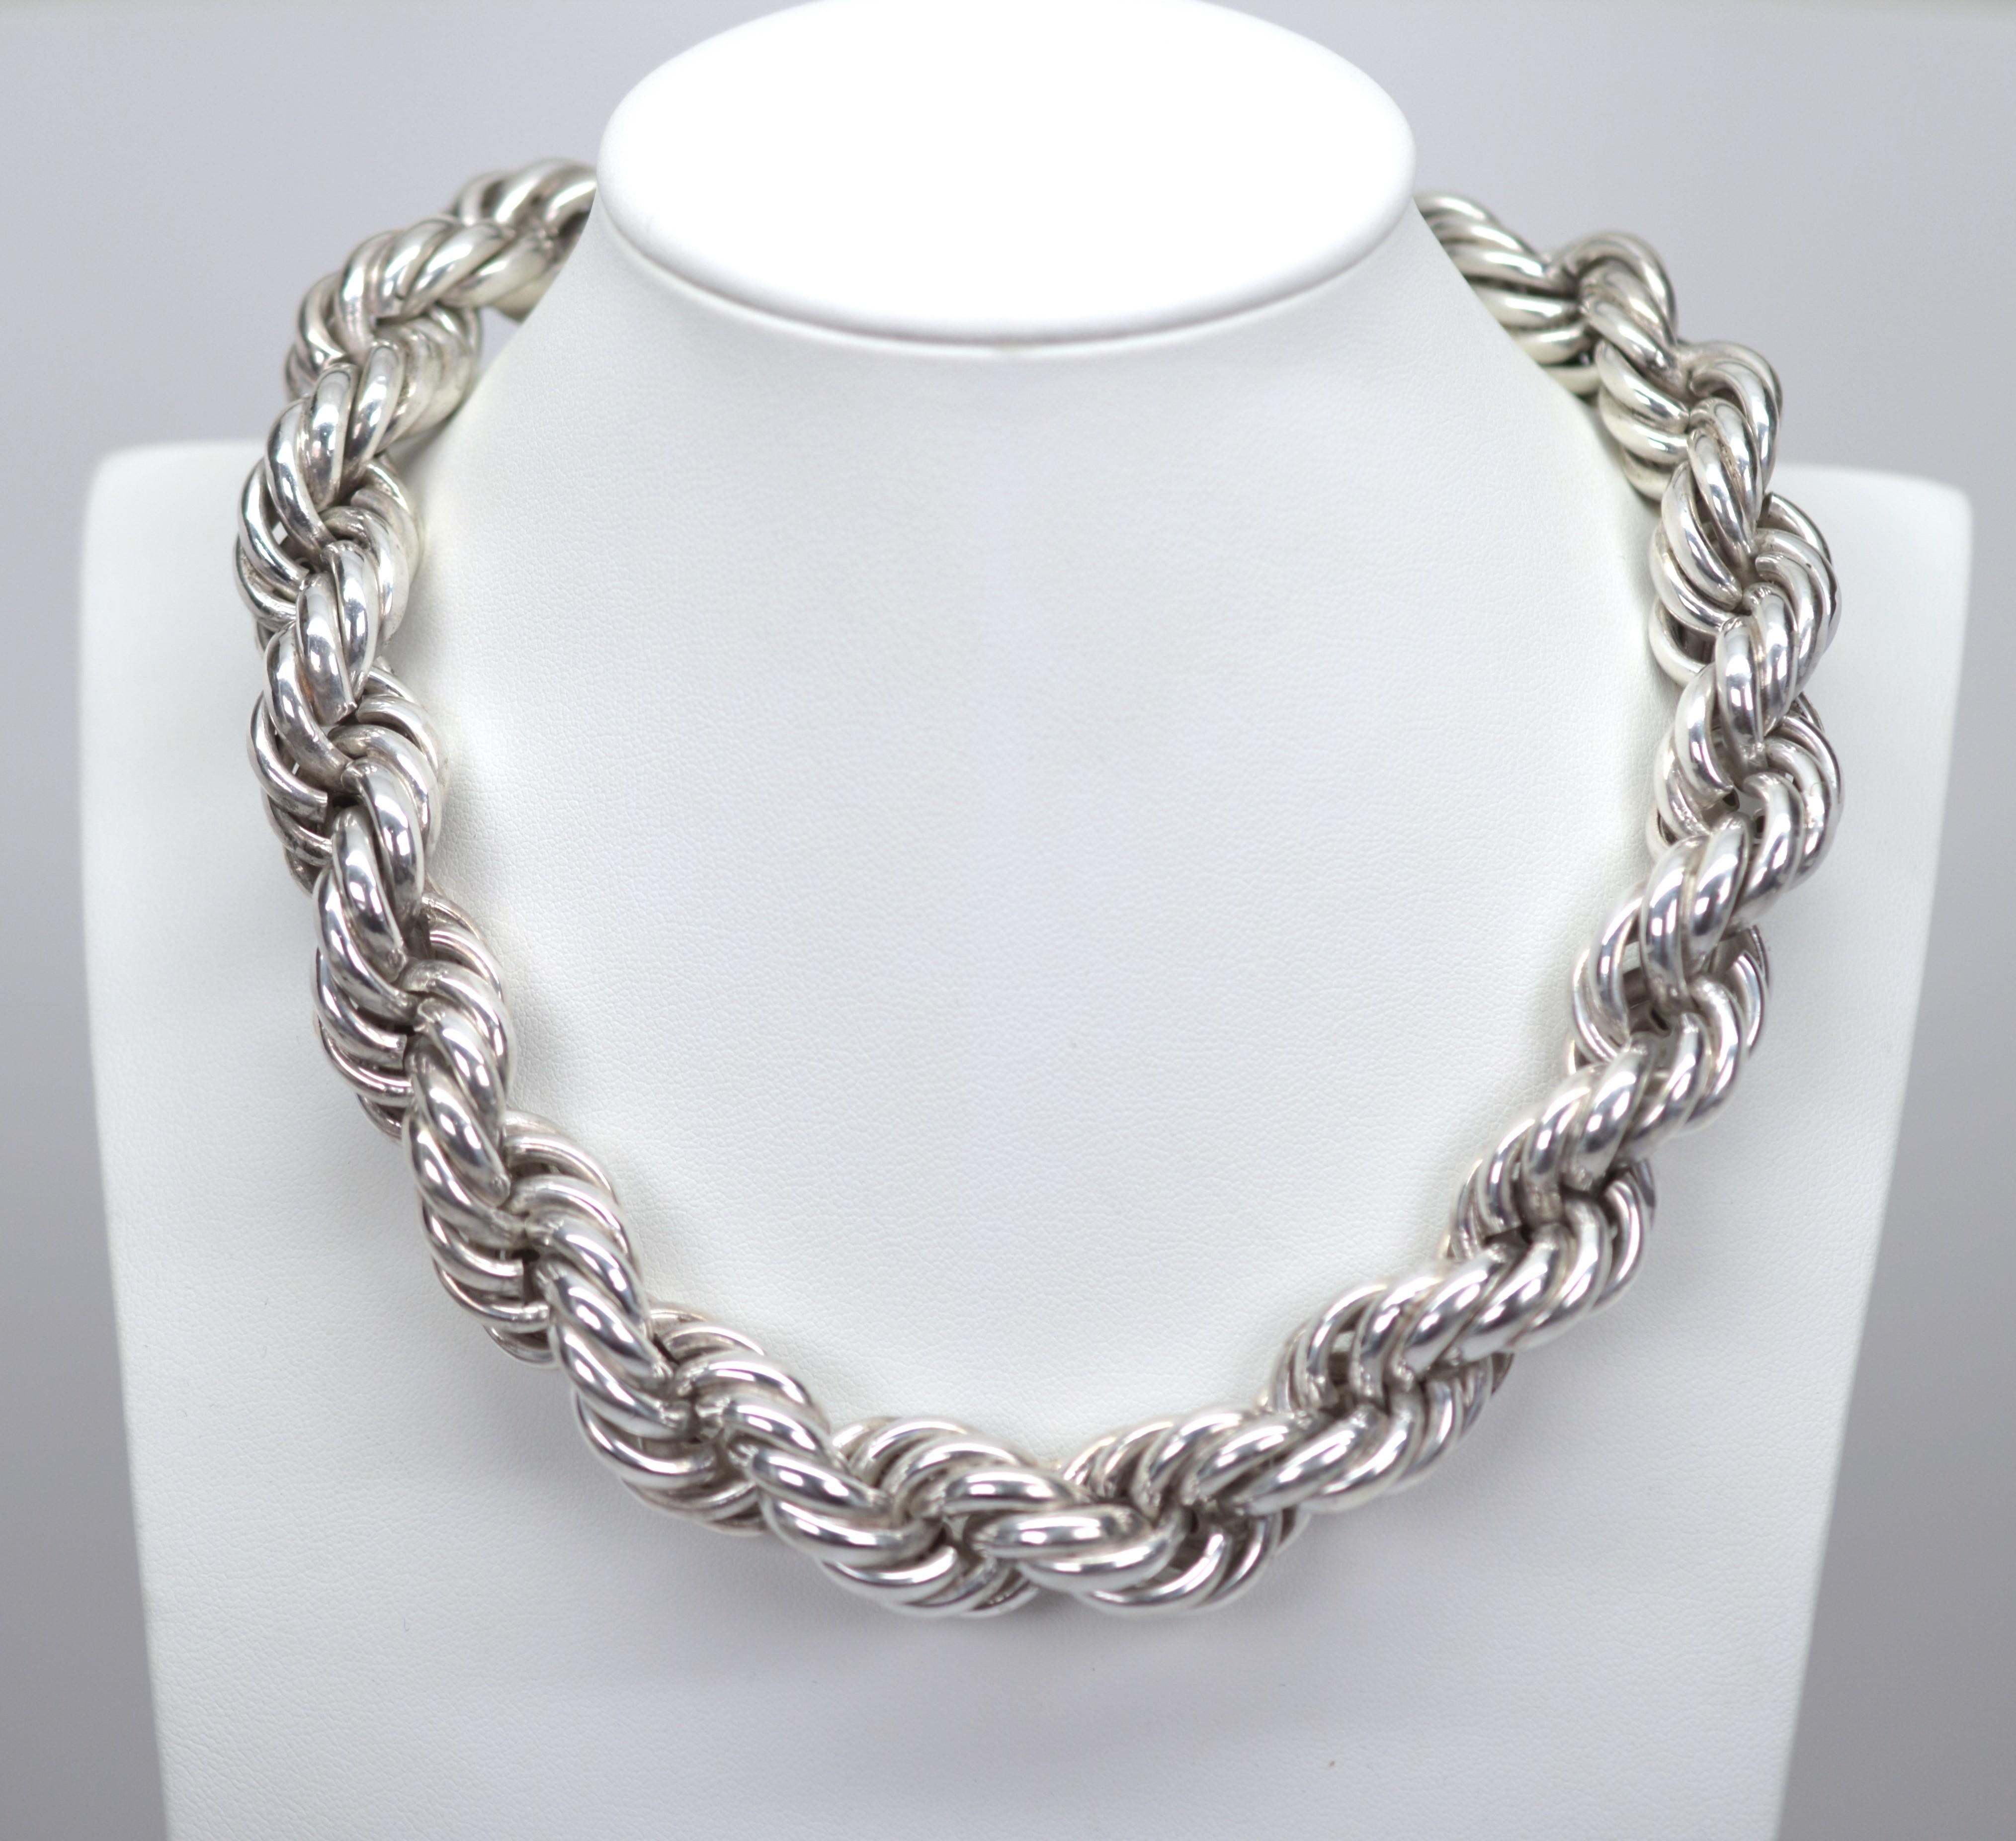 14mm rope chain